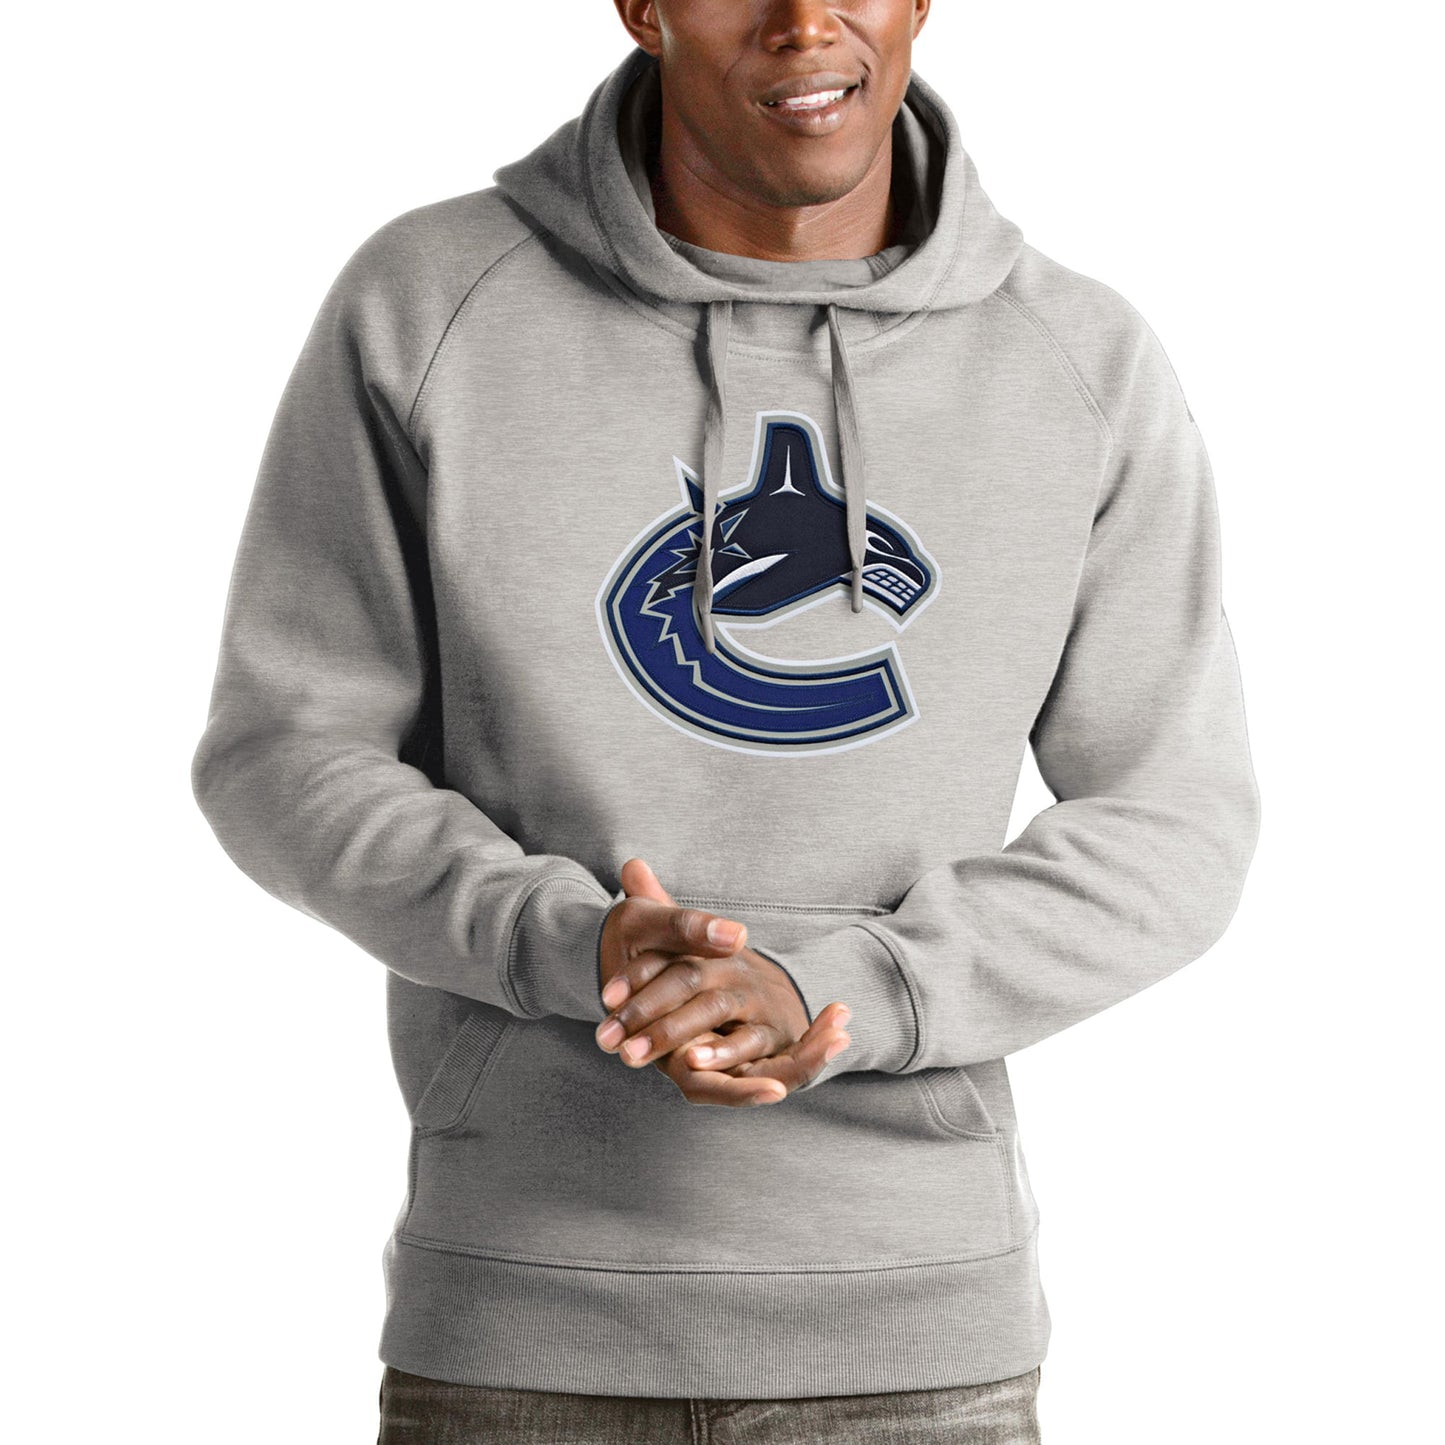 Men's Antigua Heathered Gray Vancouver Canucks Logo Victory Pullover Hoodie